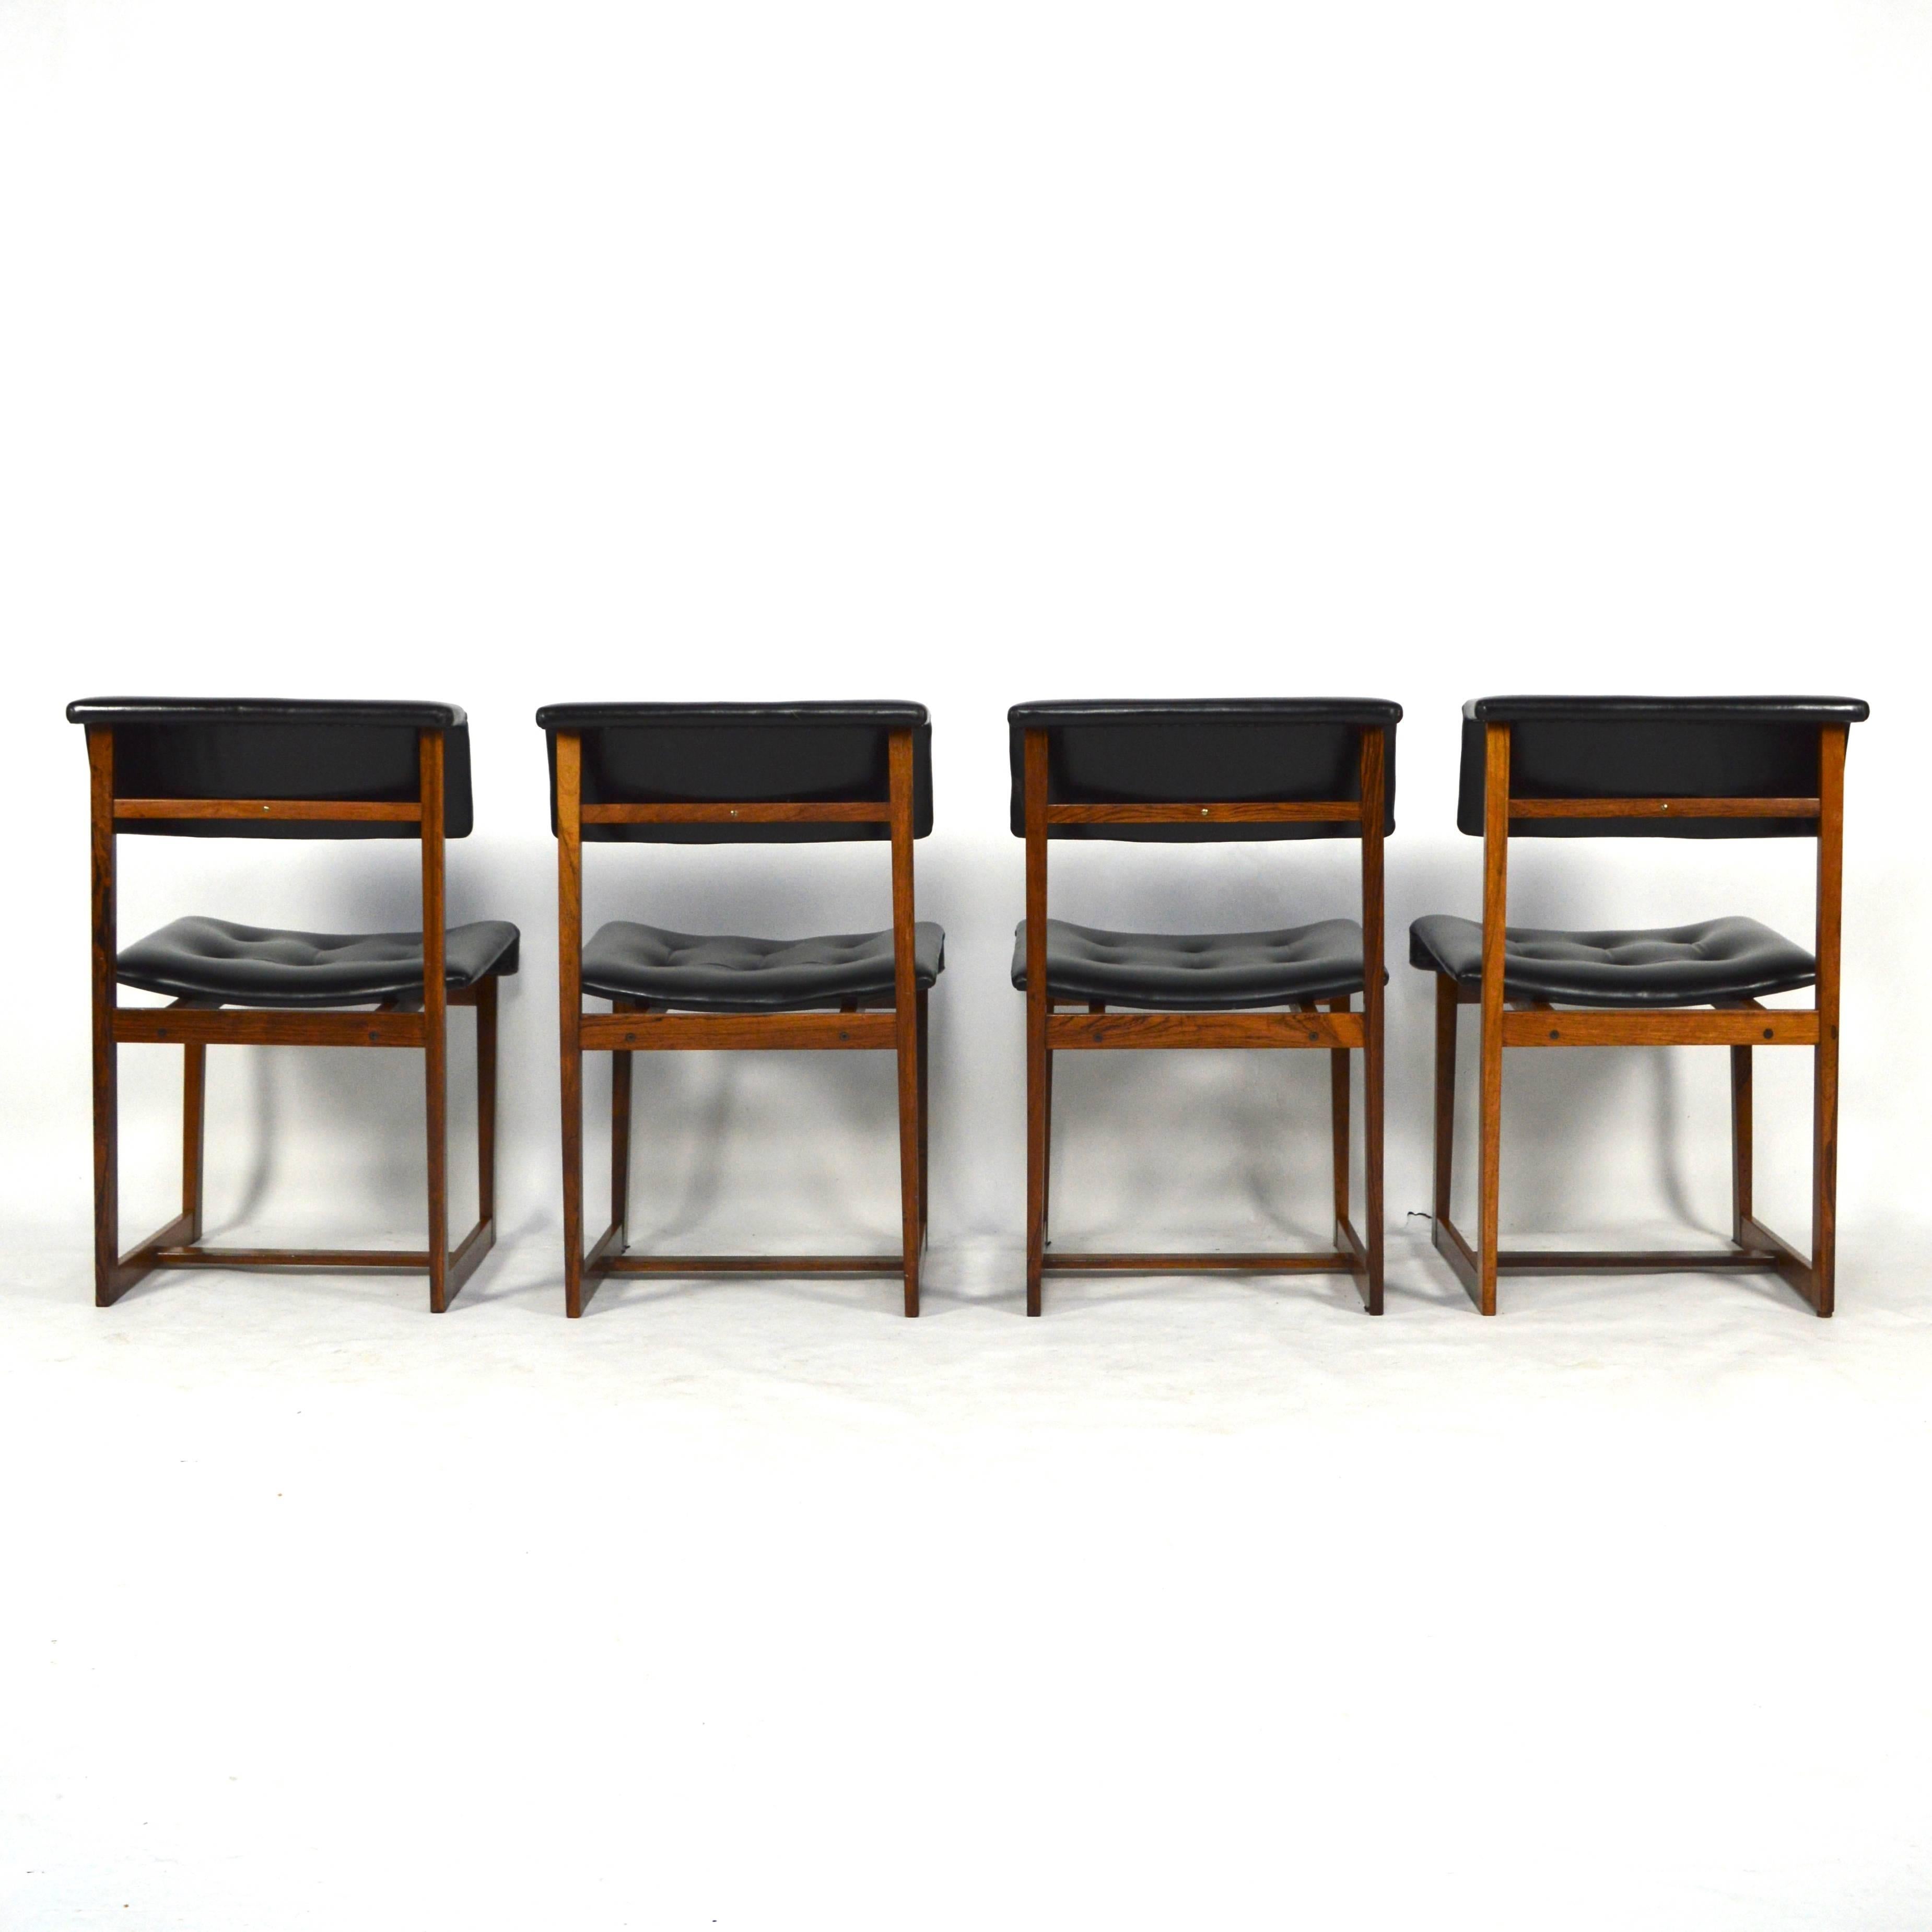 Scandinavian Henning Sørensen Rosewood and Black Leather Dining Chairs, 1950s